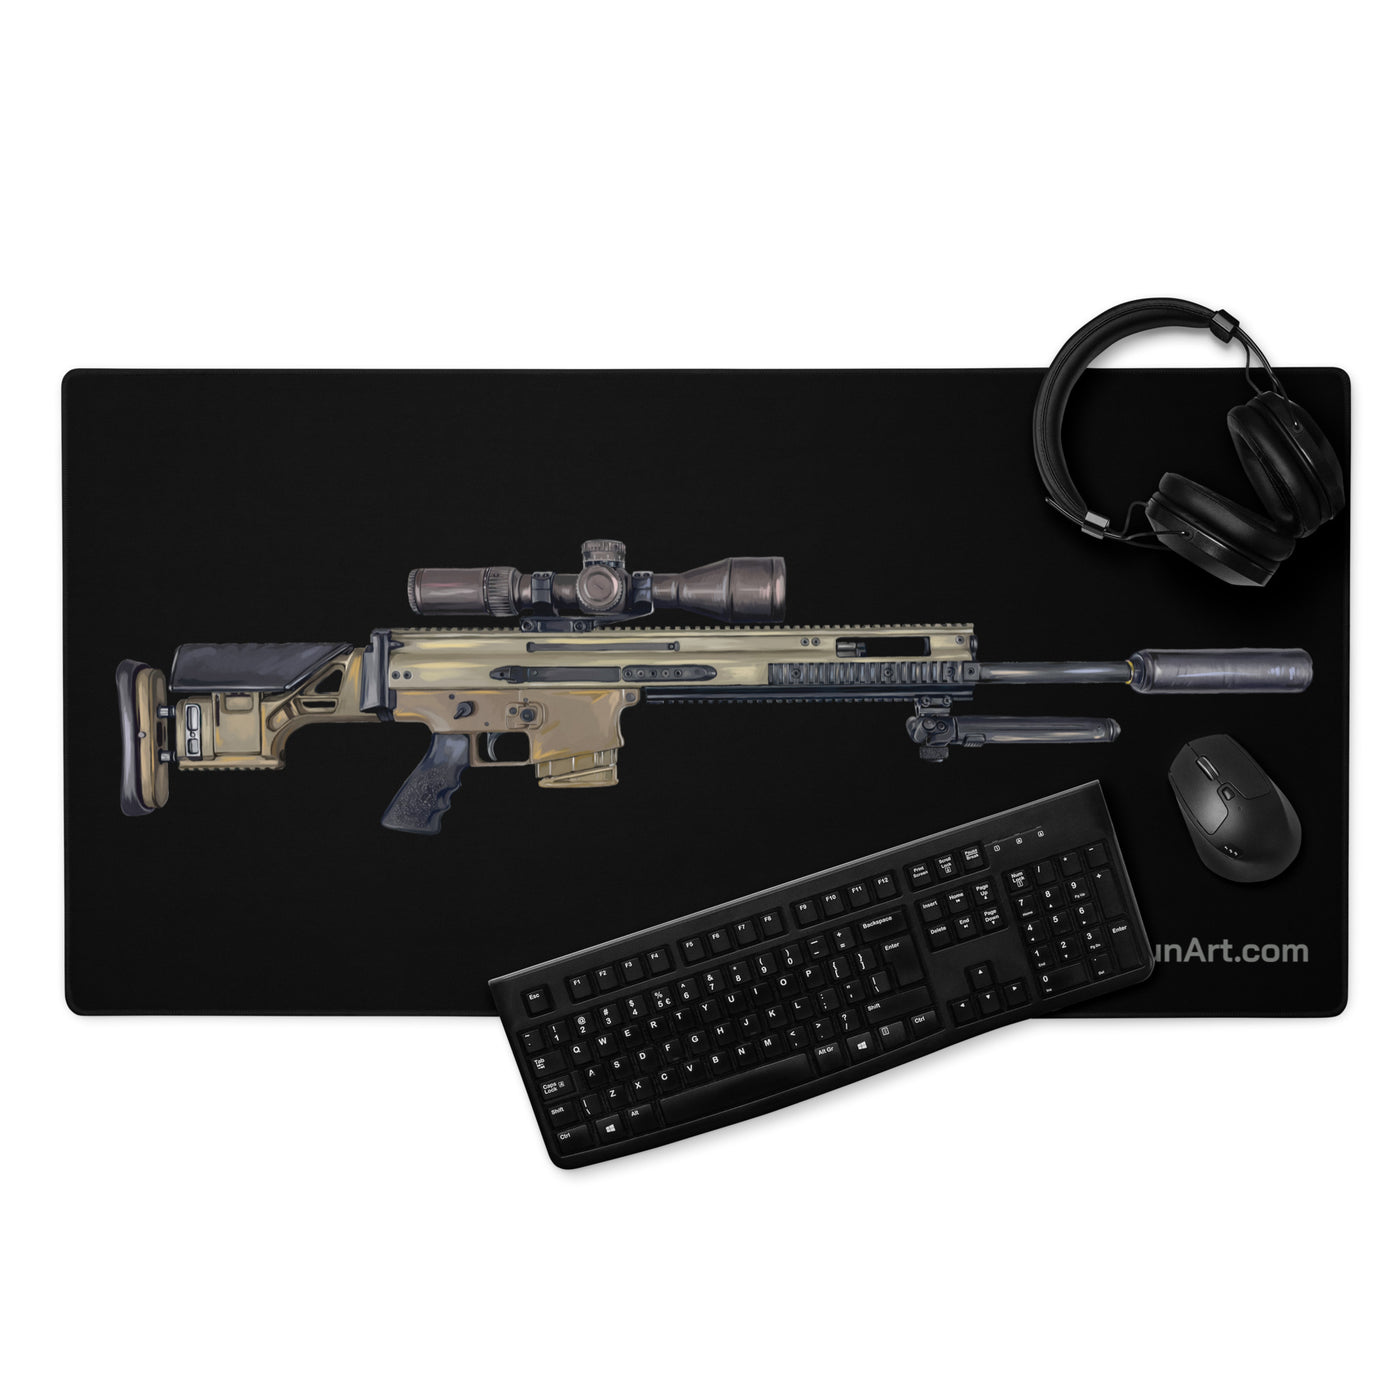 Socom Sniper Rifle Gaming Mouse Pad - Just The Piece - Black Background